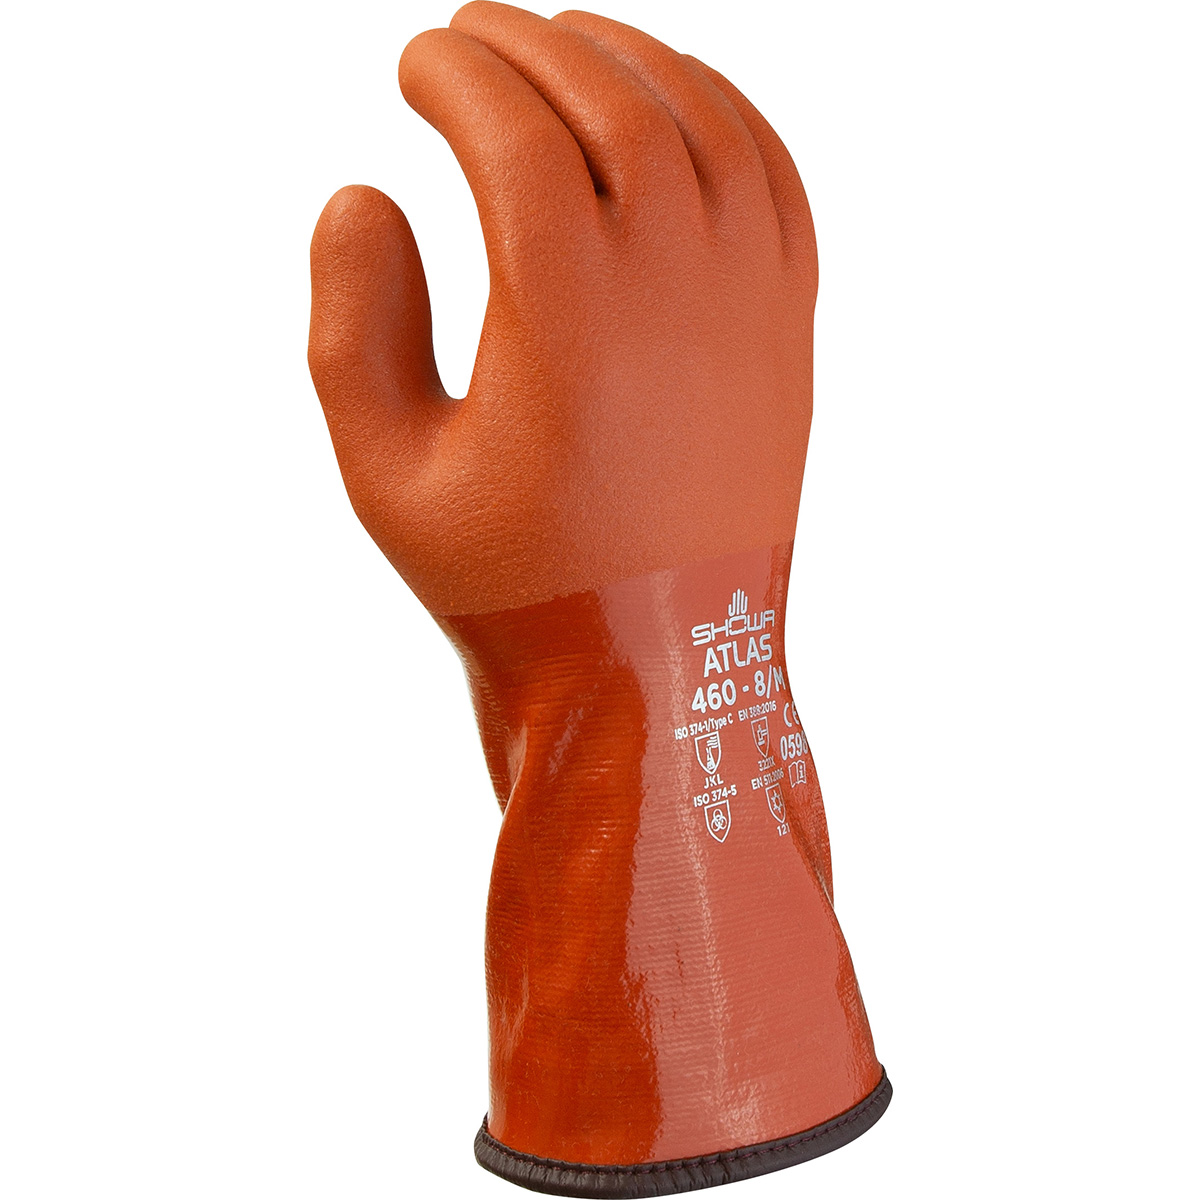 Chemical resistant PVC fully coated double dipped, insulated with seamless acrylic liner, orange, rough finish, medium